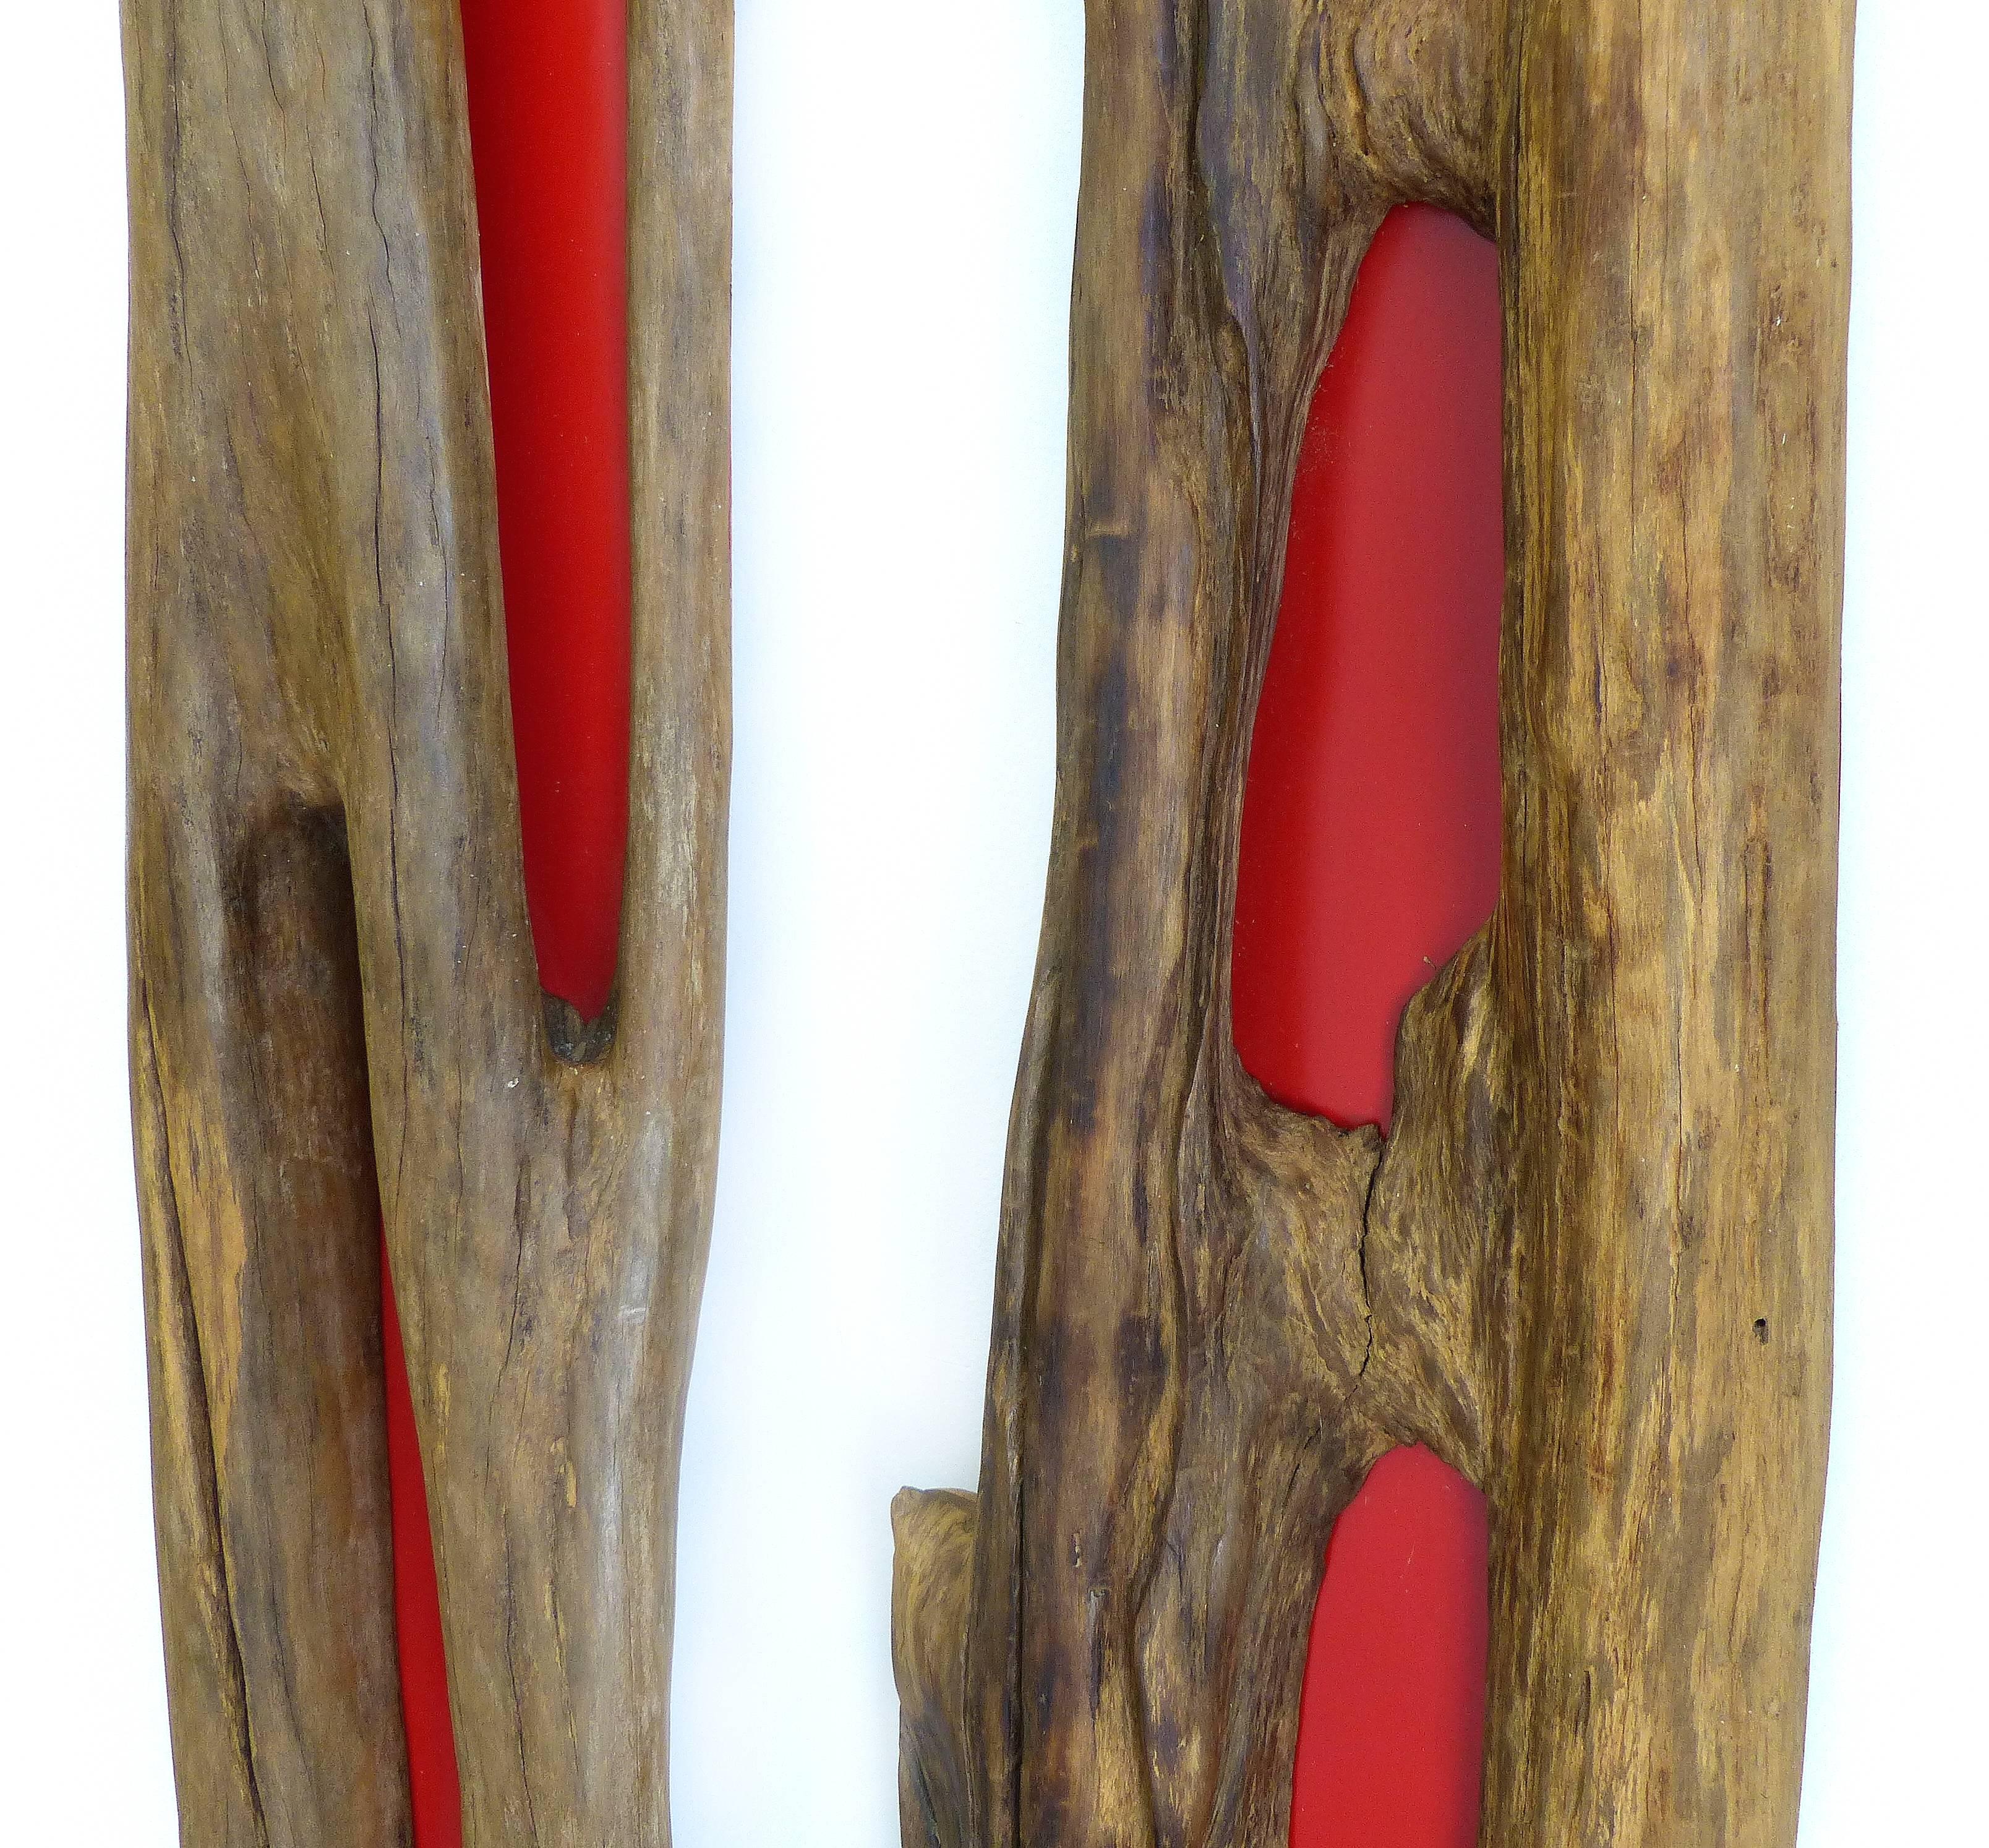 Contemporary Pair of Reclaimed Wood Log Sculptures by Valeria Totti